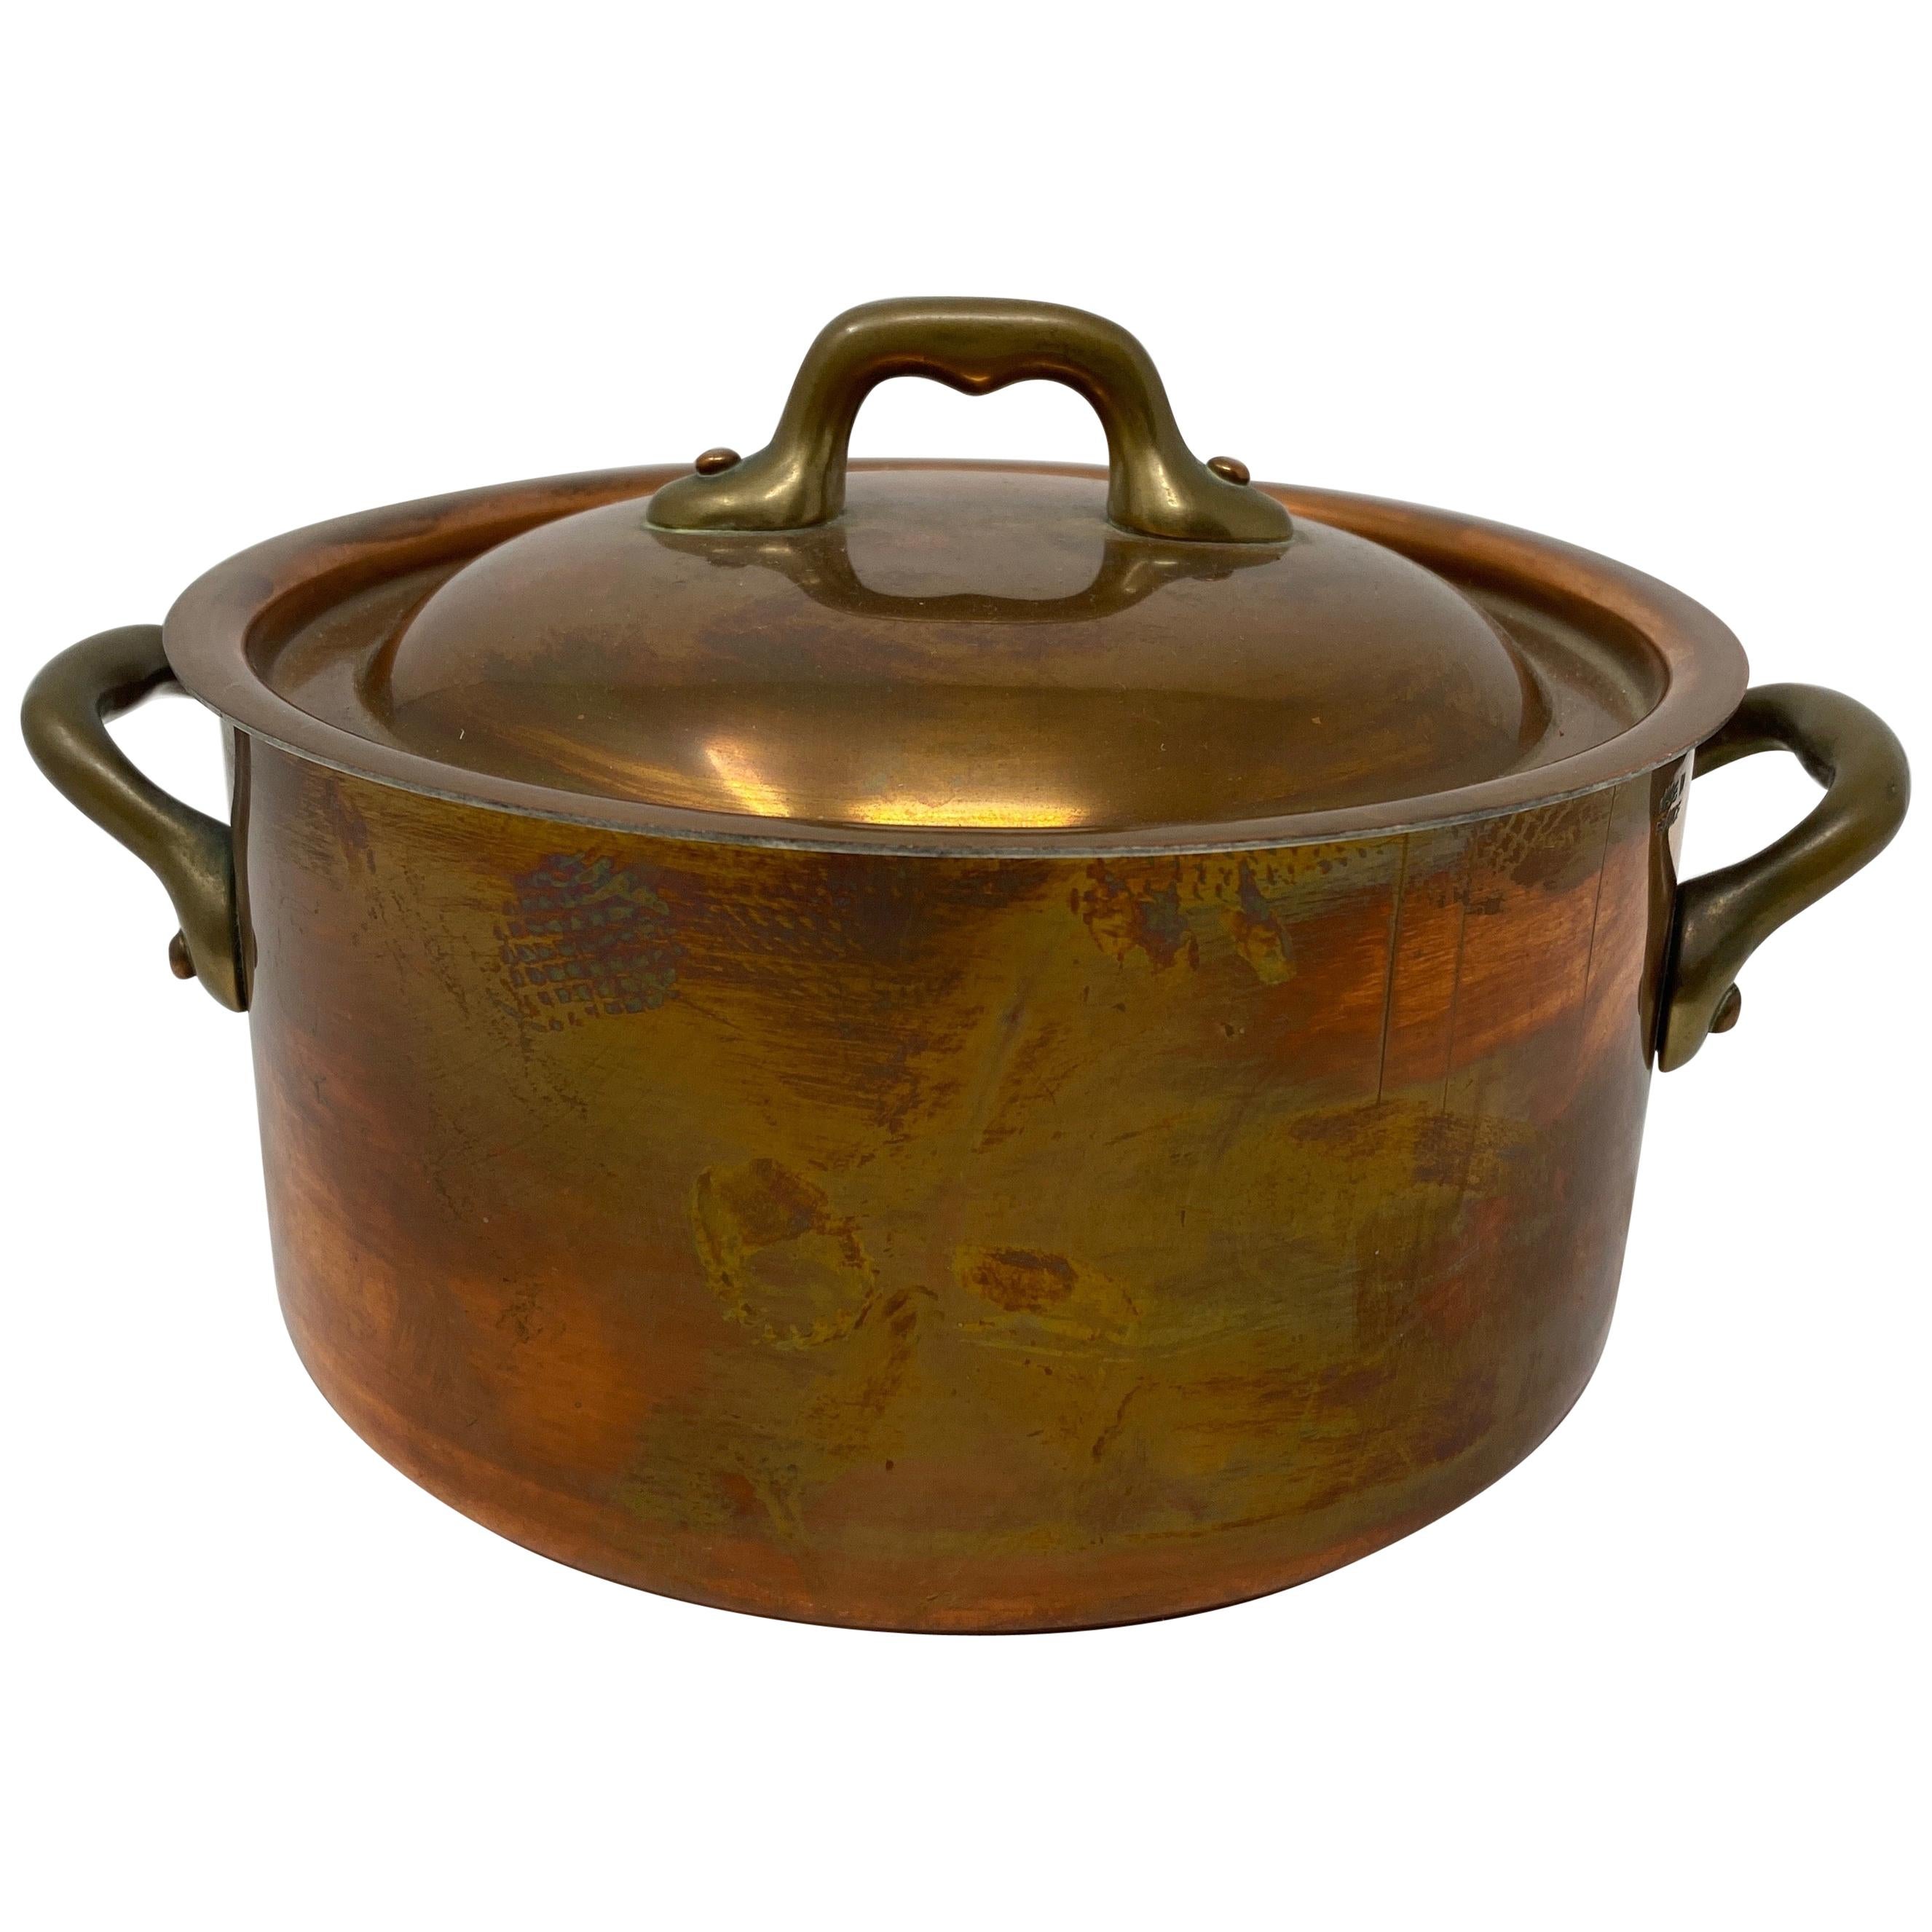 Small Copper Pot with Brass Handles and Lid